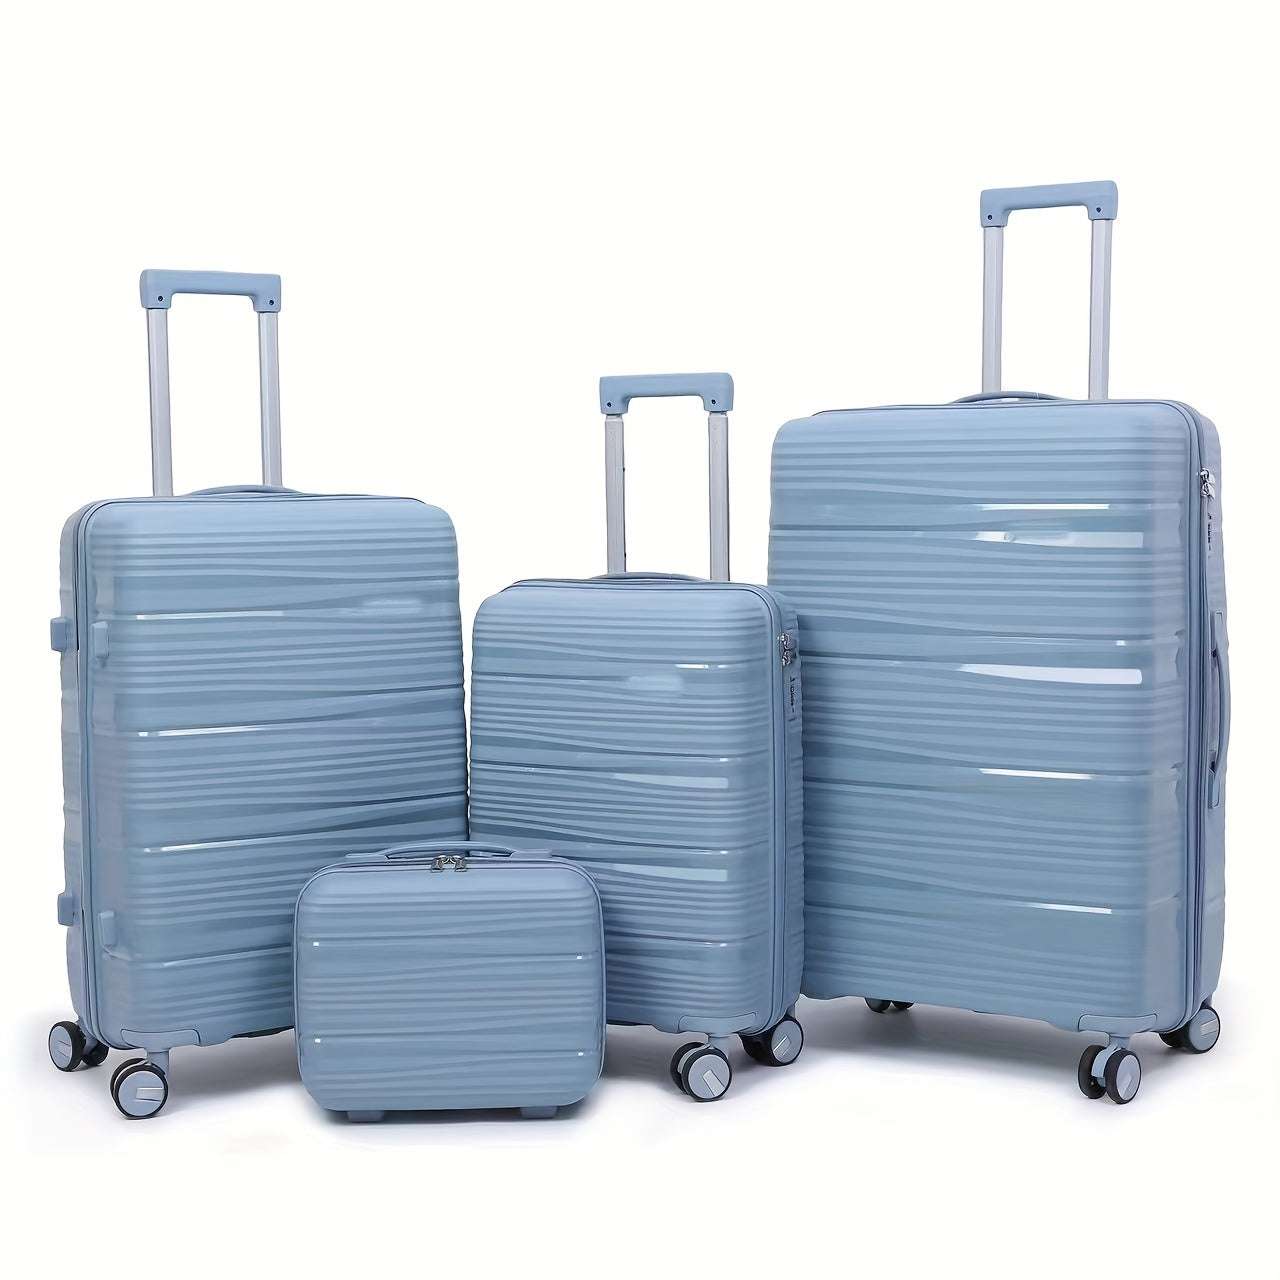 13/20/24/28inches Four-Piece Travel Trolley Set - Smooth Rolling, Impact-Resistant Cases for Family Fun 143 Luggage OK•PhotoFineArt OK•PhotoFineArt